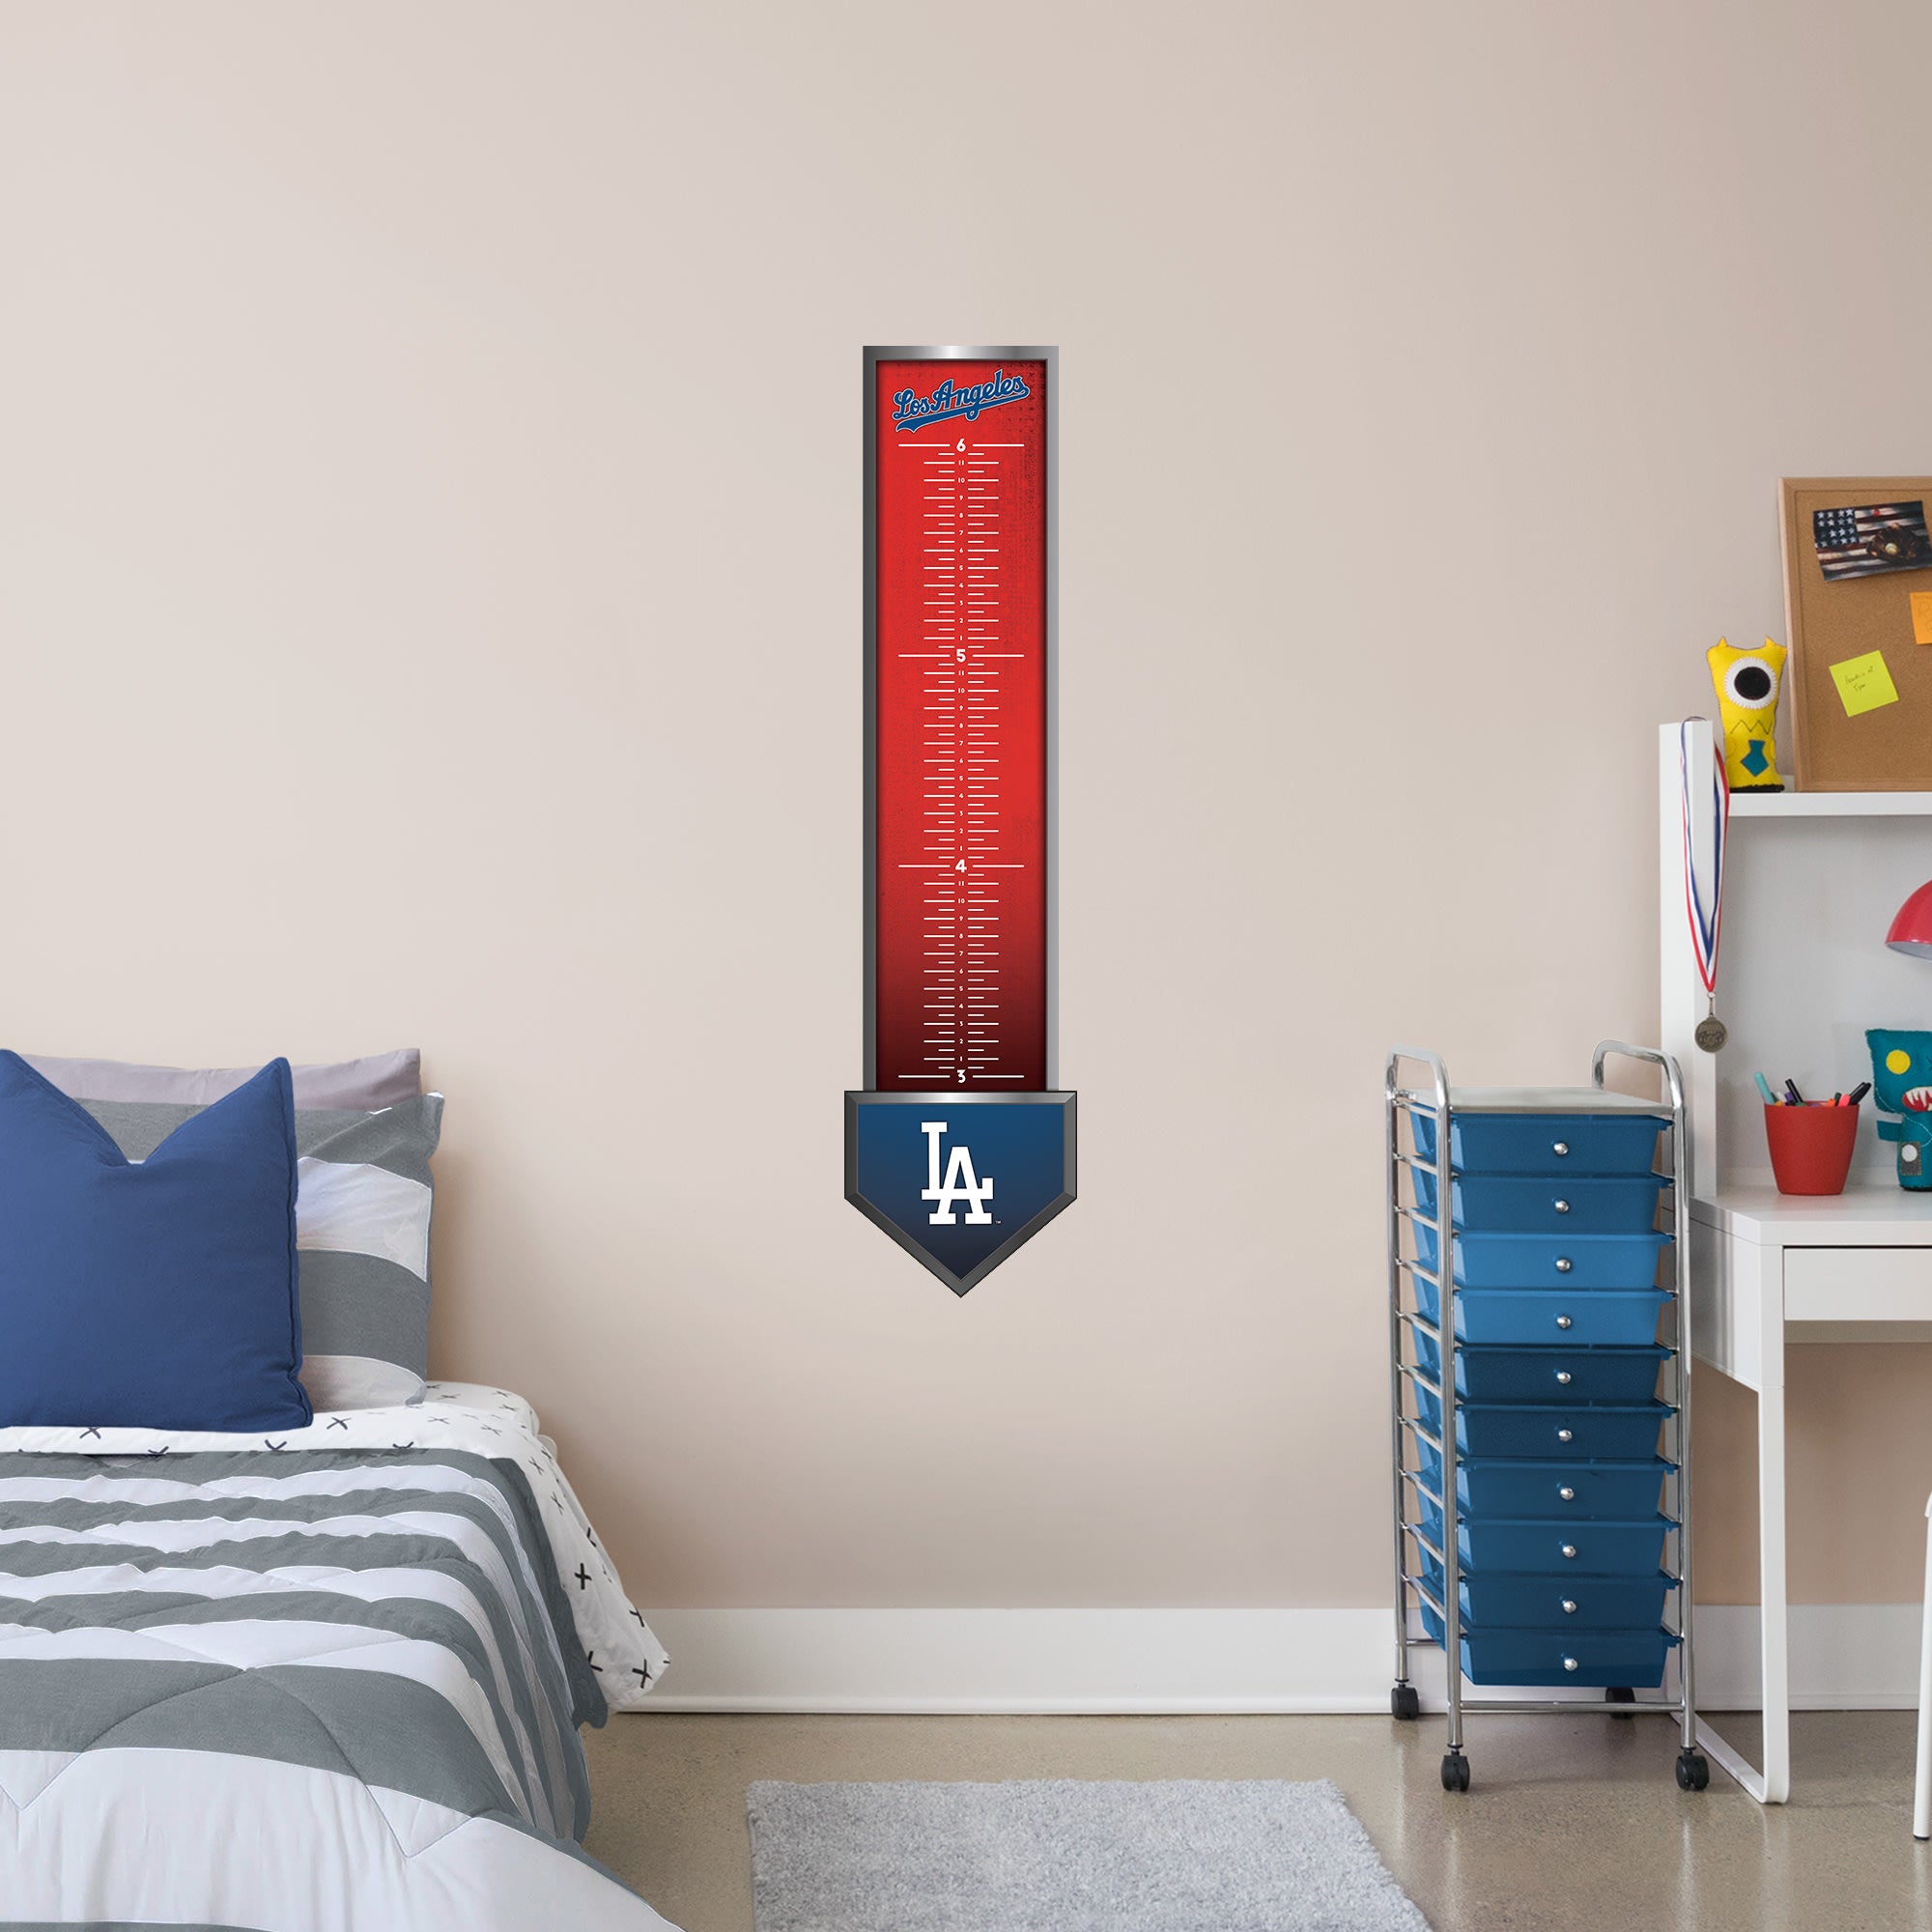 Los Angeles Dodgers: Growth Chart - Officially Licensed MLB Removable Wall Graphic 13.0"W x 54.0"H by Fathead | Vinyl